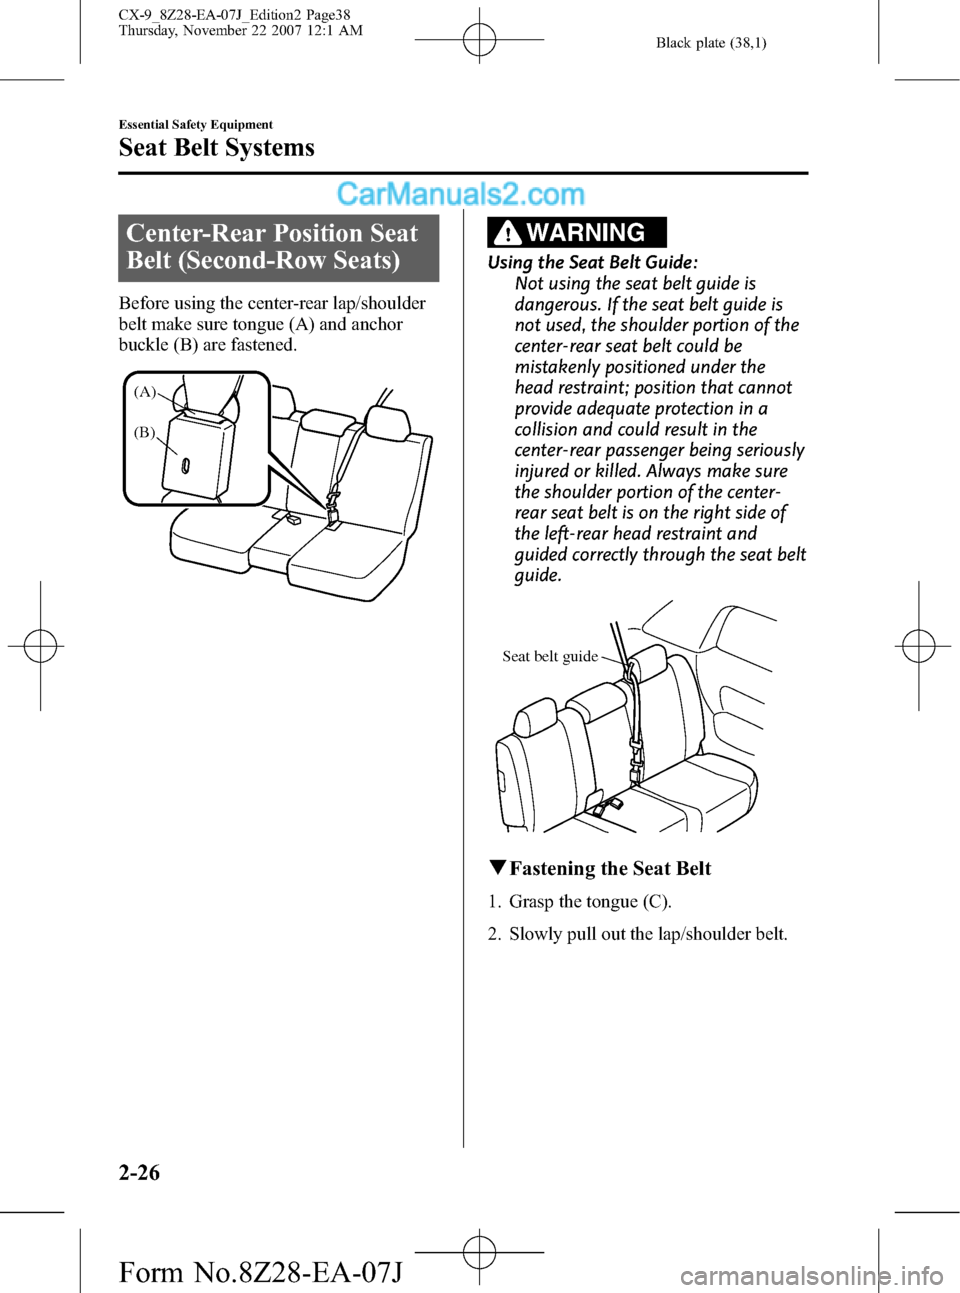 MAZDA MODEL CX-9 2008   (in English) Owners Guide Black plate (38,1)
Center-Rear Position Seat
Belt (Second-Row Seats)
Before using the center-rear lap/shoulder
belt make sure tongue (A) and anchor
buckle (B) are fastened.
(A)
(B)
WARNING
Using the S